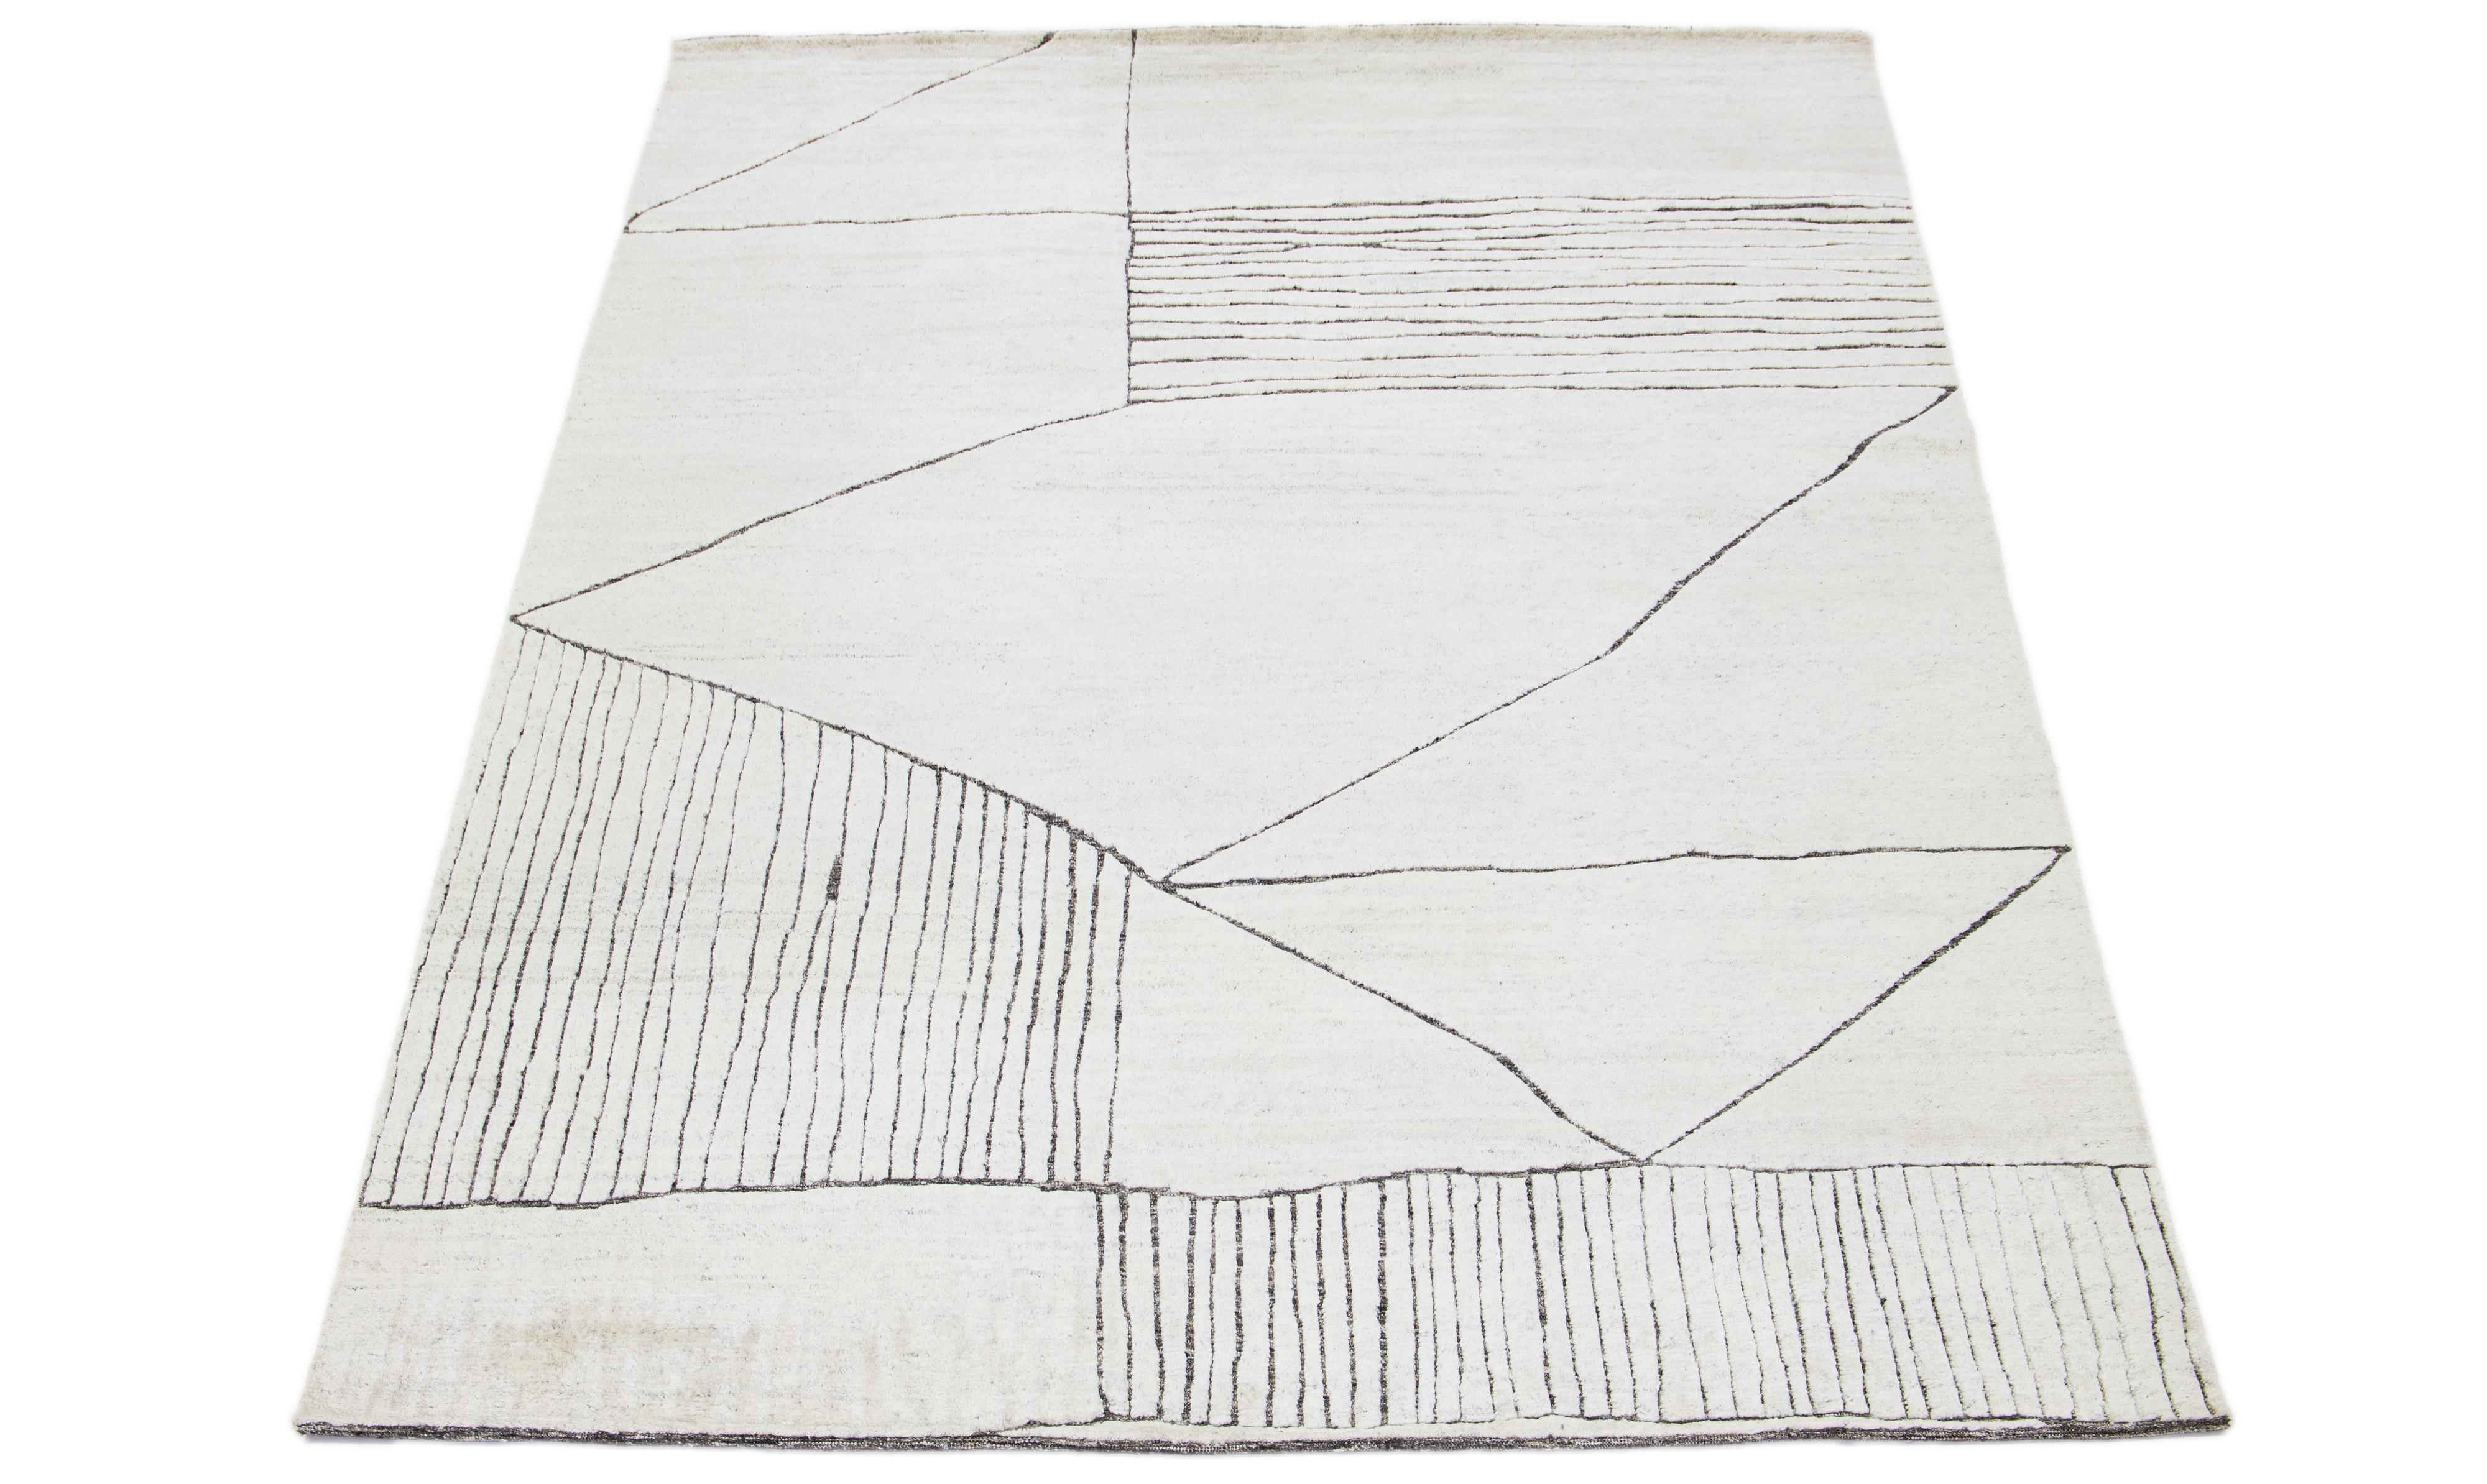 This luxurious wool rug features a timeless Moroccan pattern in a contemporary abstract Minimalist style, utilizing Ivory tones to create a sleek and modern look. It is crafted using traditional hand-knotting techniques, ensuring exceptional quality